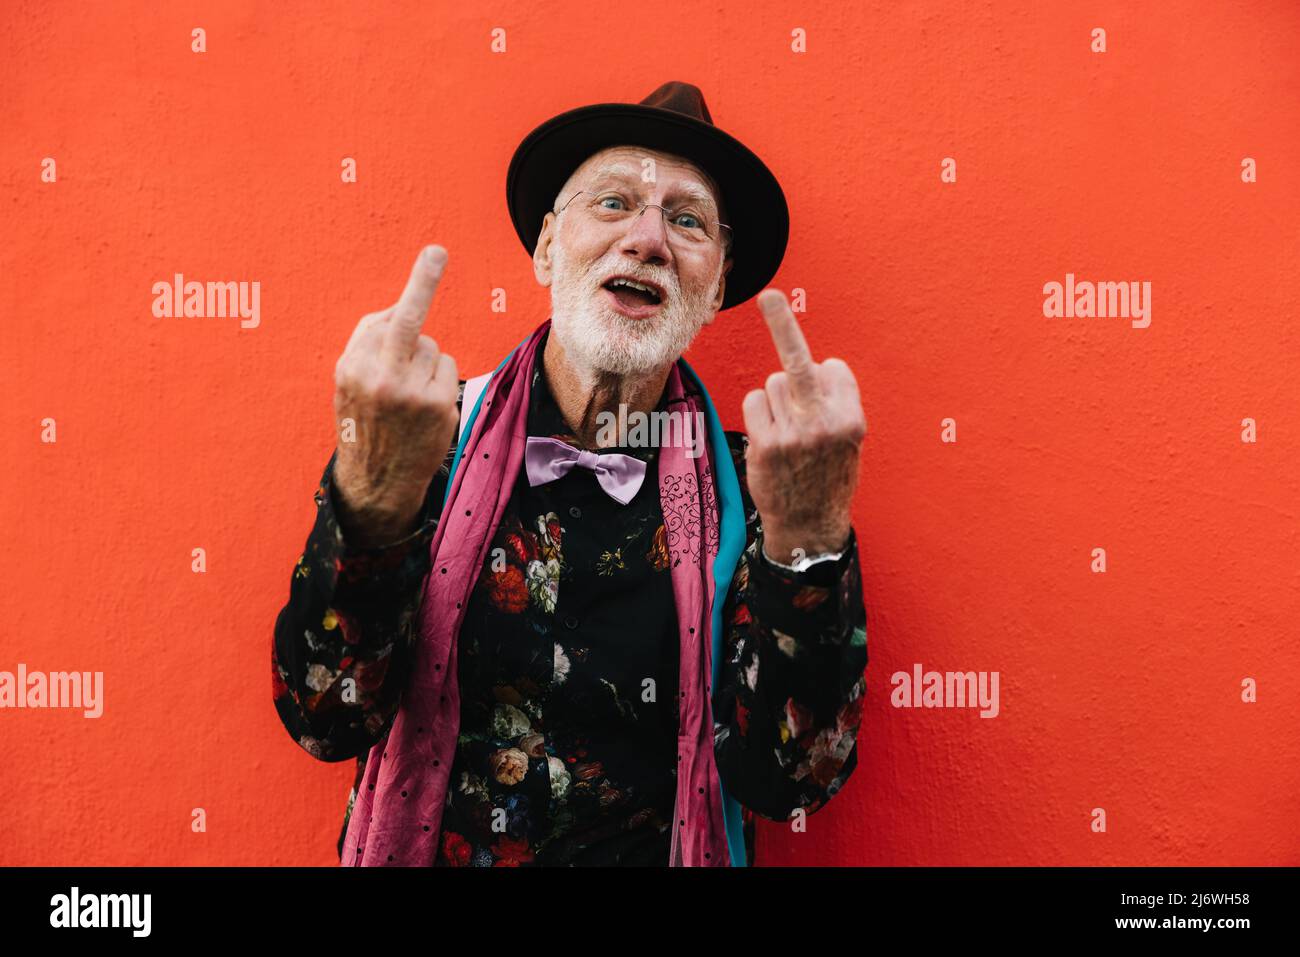 Happy eccentric man showing his middle fingers while standing against a red background. Mature man looking at the camera while making a swear gesture. Stock Photo